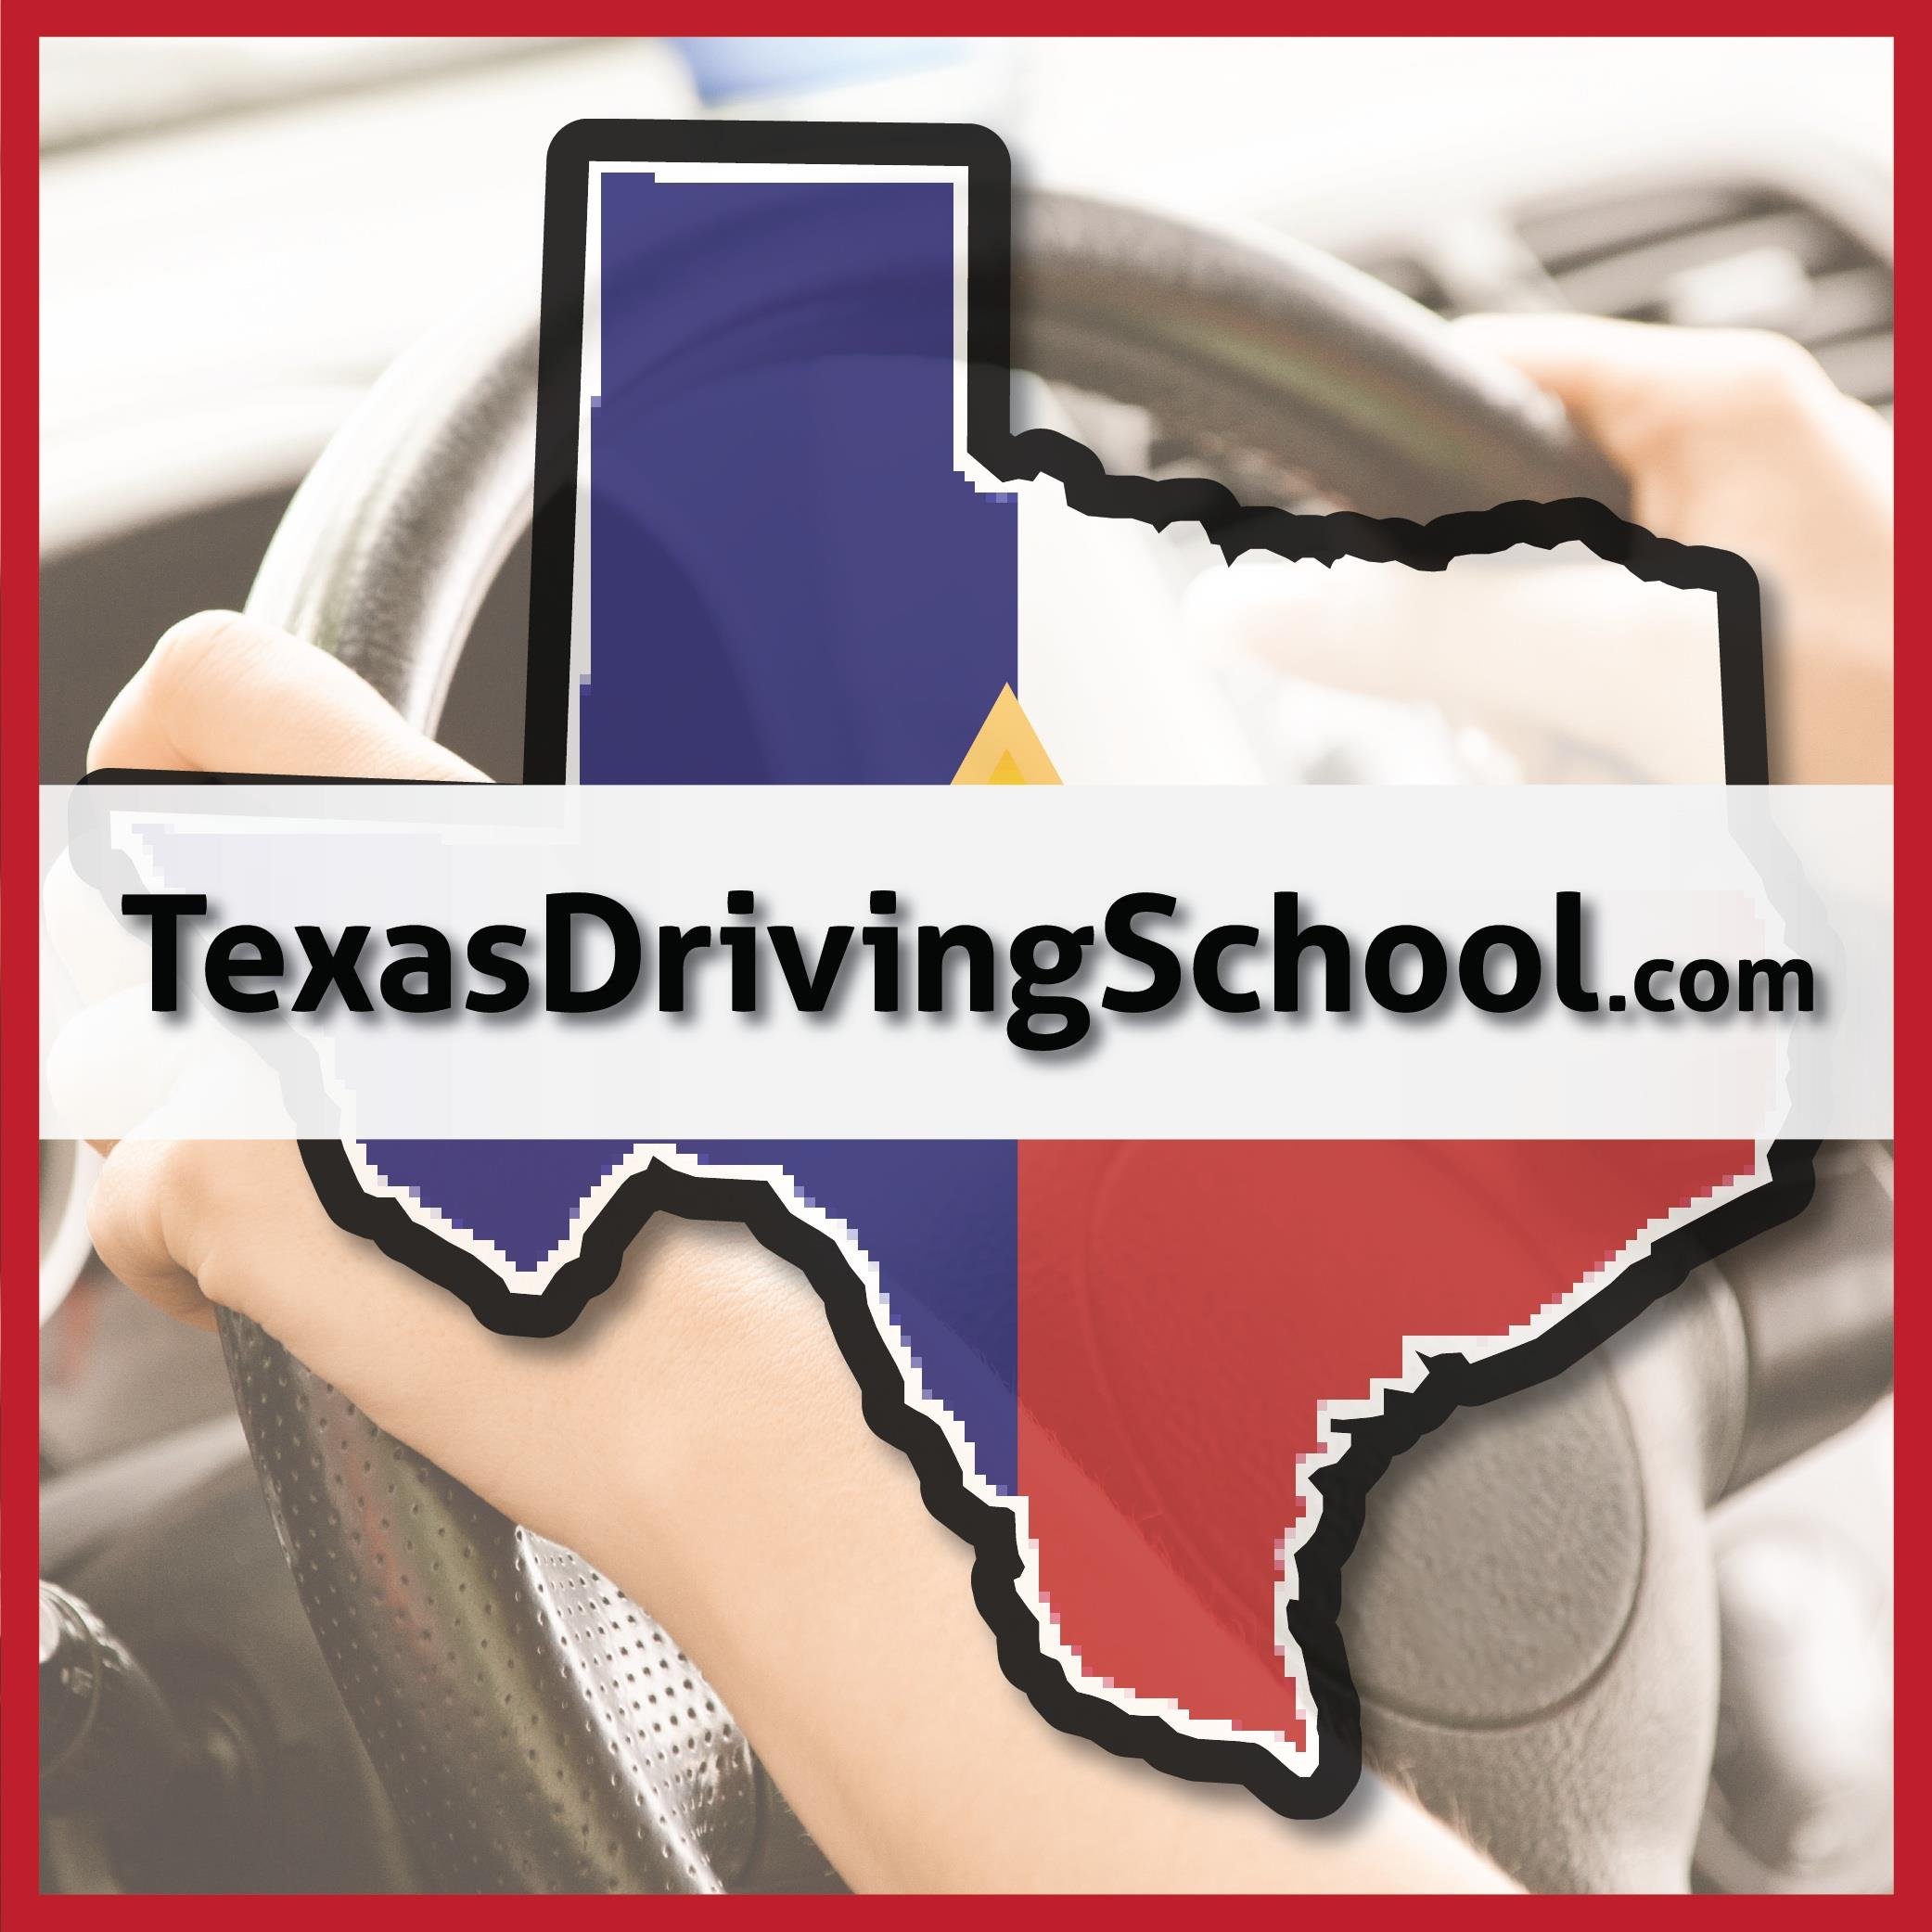 Texas-approved defensive driving & driver education courses that meet DPS & TEA requirements. Online courses for Parent Taught, Adult Driver & Ticket Dismissal